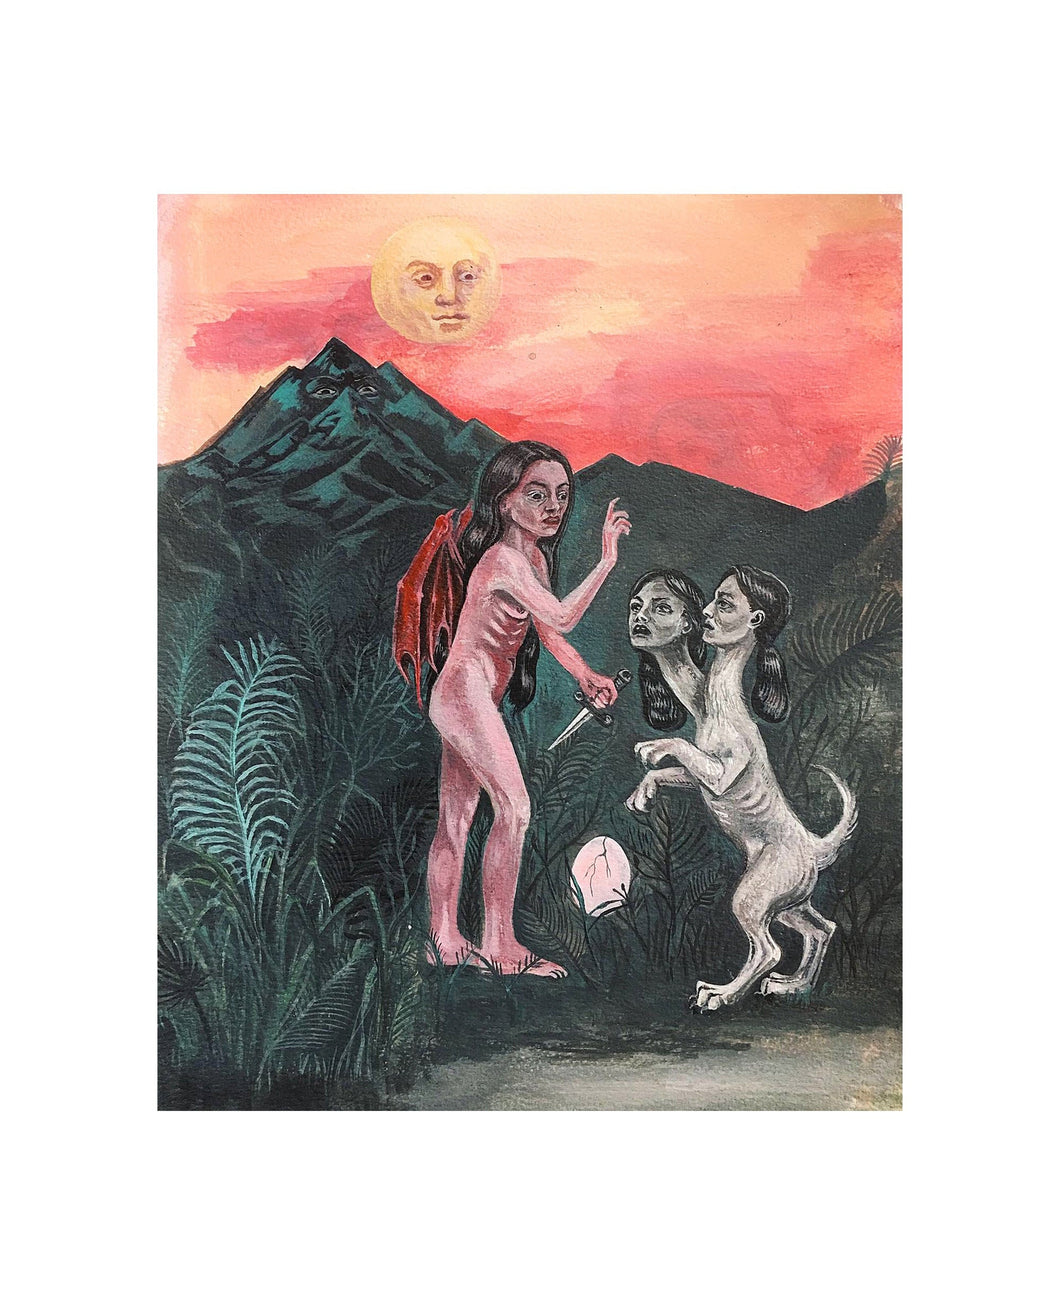 Lilith and Nephilim, Acrylic on 300 gsm Matte Paper, Original Art, Acrylic Painting, Orthros, Chimera, Orphic egg, 28x38 cm